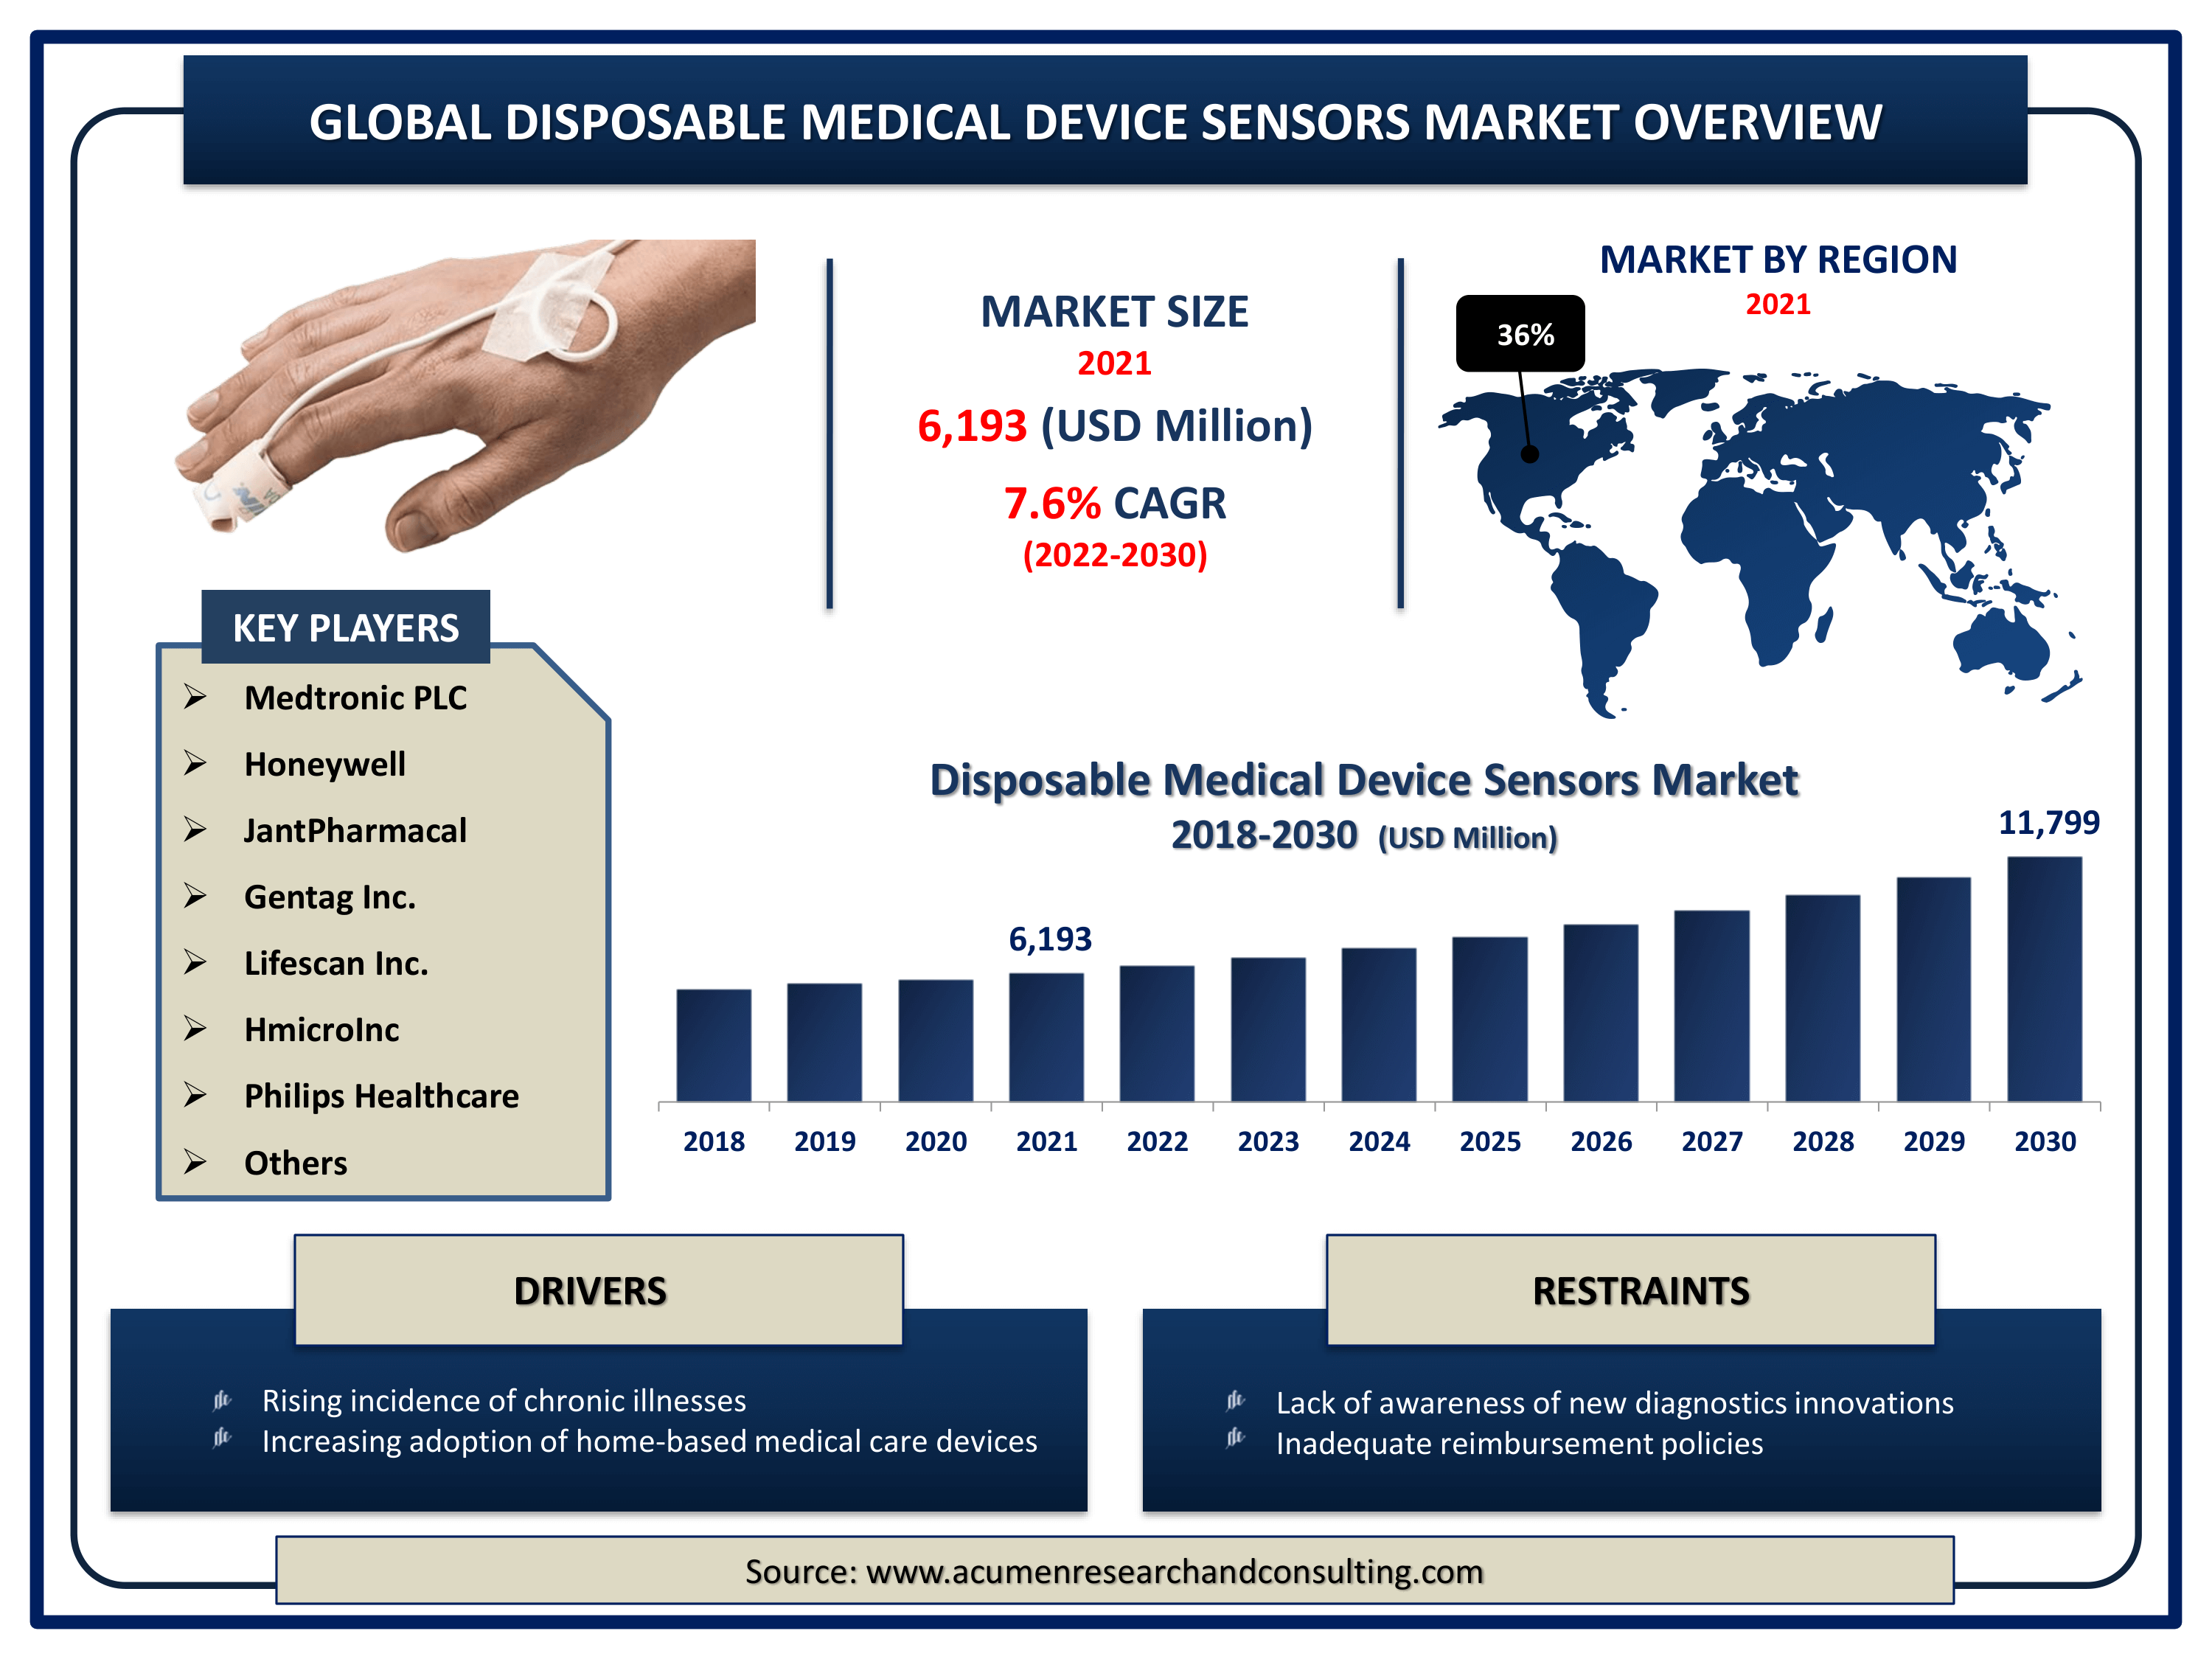 Global disposable medical device sensors market revenue is expected to increase by USD 11,799 million by 2030, with a 7.6% CAGR from 2022 to 2030